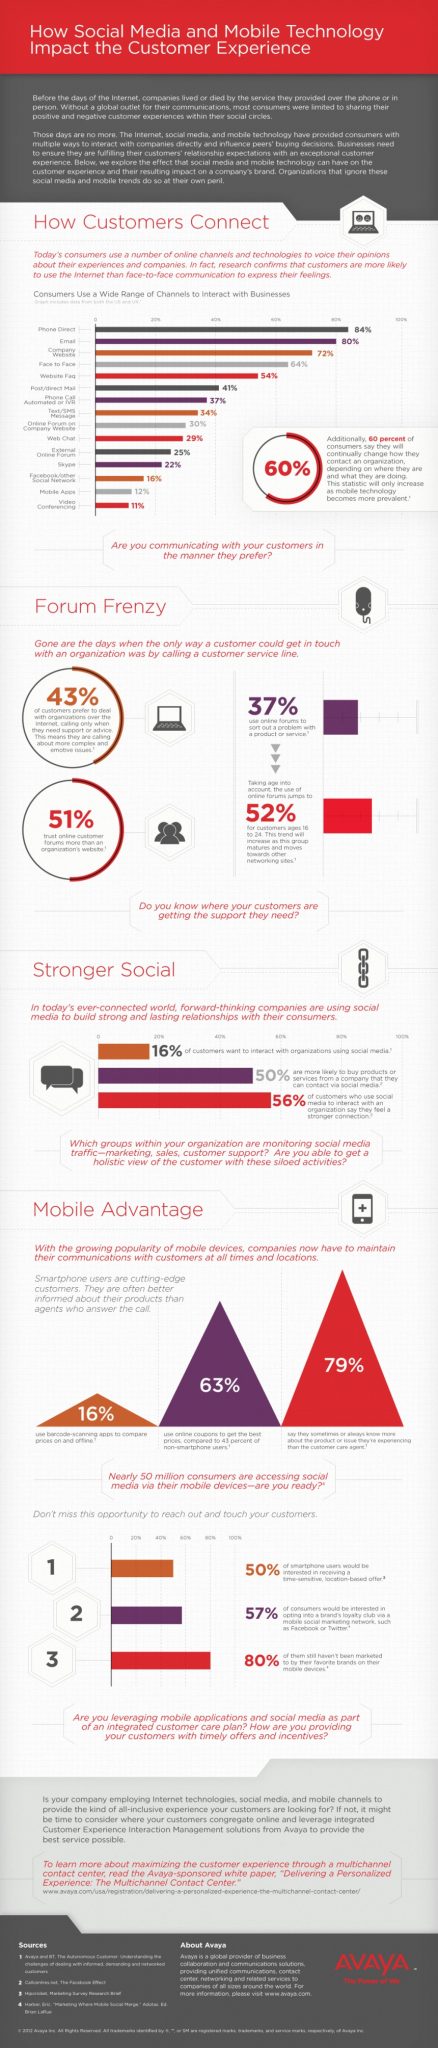 How Social Media and Mobile Technology Impact the Customer Experience